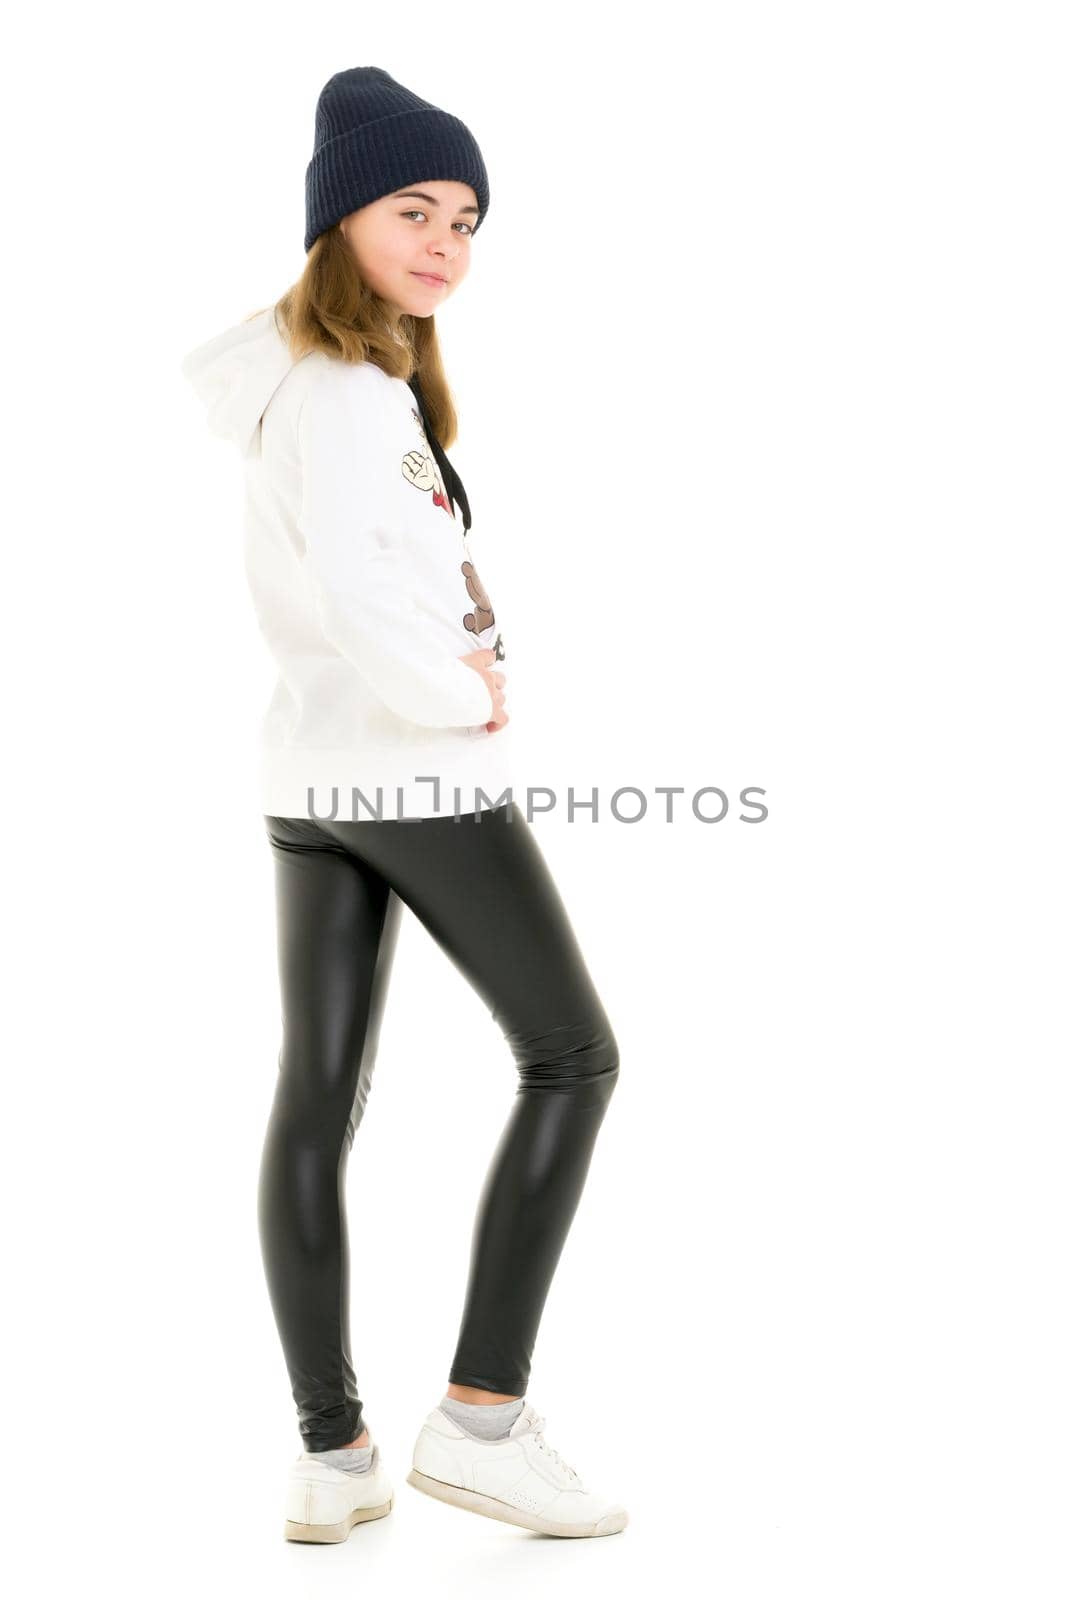 Portrait of a gymnast girl in a tracksuit. Isolated on white background